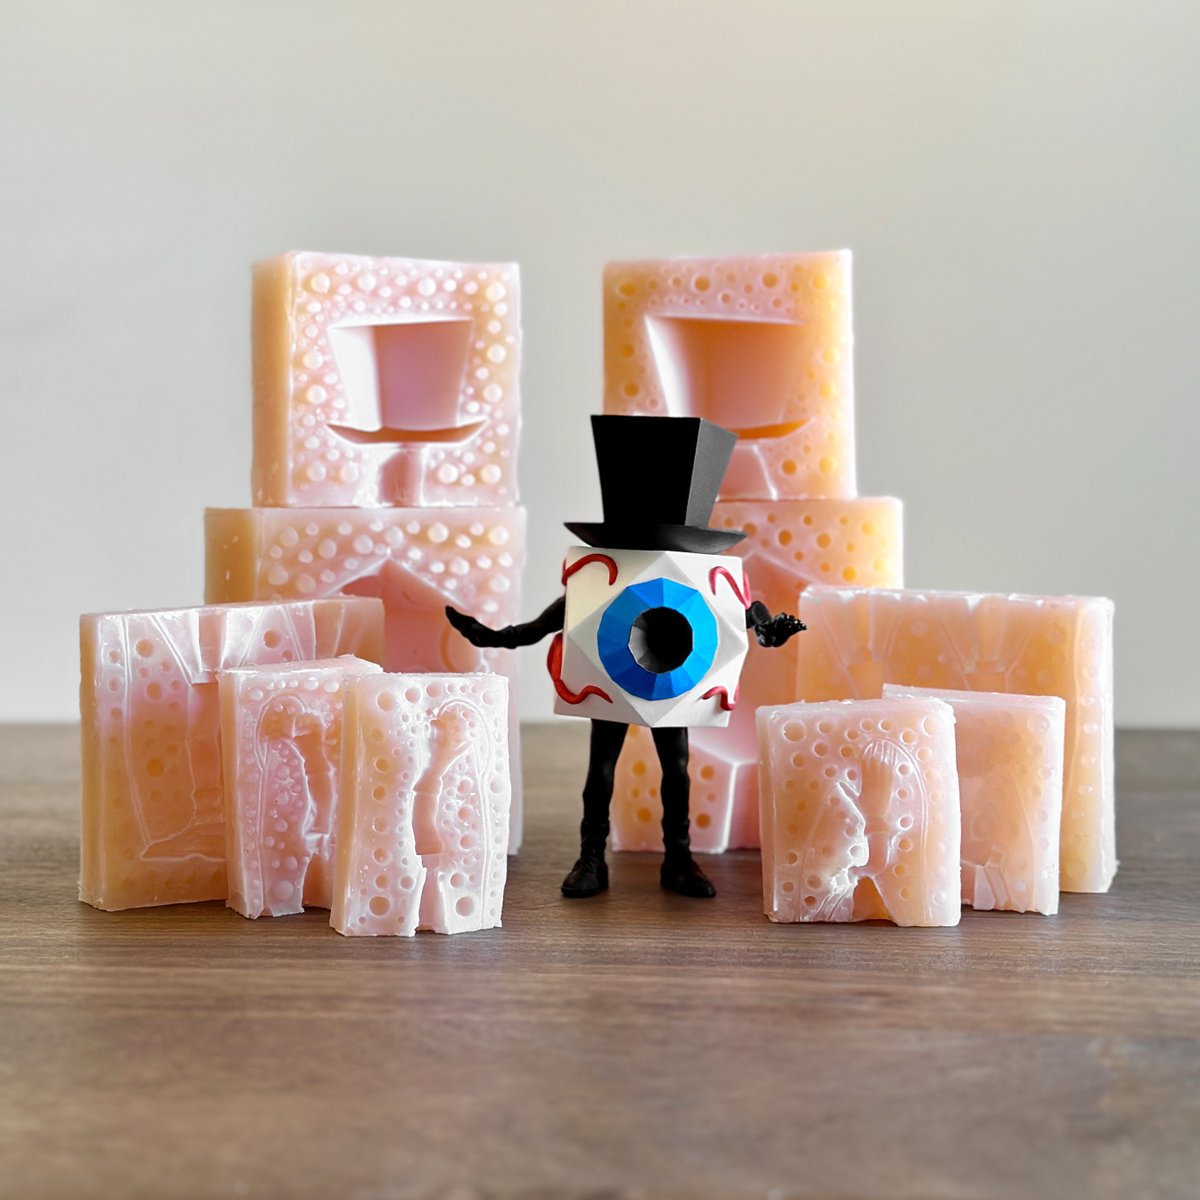 Melodic Virtue (@melodicvirtue) is auctioning off the last remaining 6' polyresin Cube-E figure along with the one-of-a-kind molds used to create them! 100% of net proceeds will be donated to Openhouse. Auction ends November 12th. melodicvirtue.com/openhouse